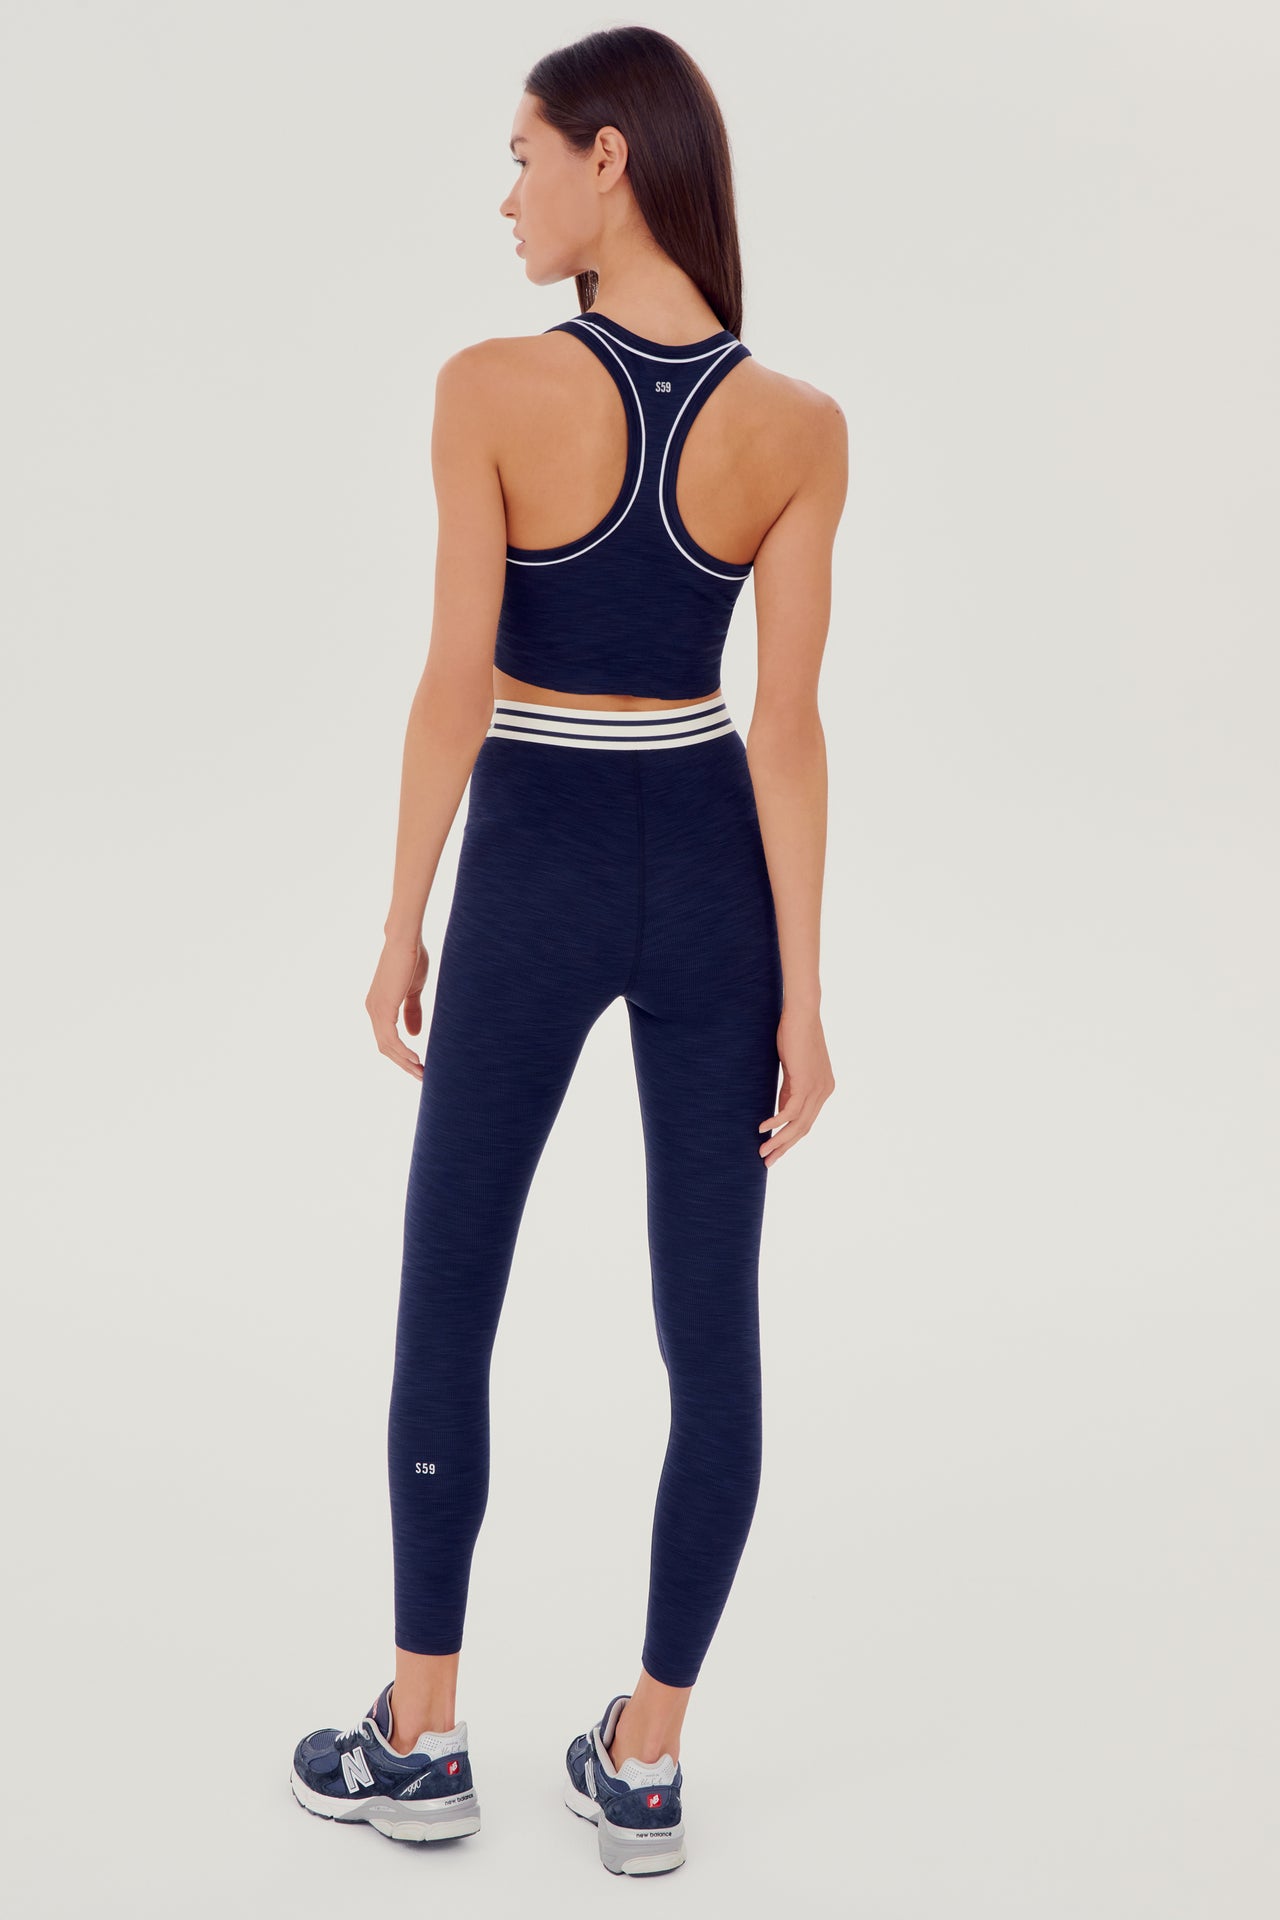 Full back view of girl wearing a dark blue leggings with white and blue waistband and a dark blue ribbed bra that stops at the ribs with thin white line along arms with blue shoes